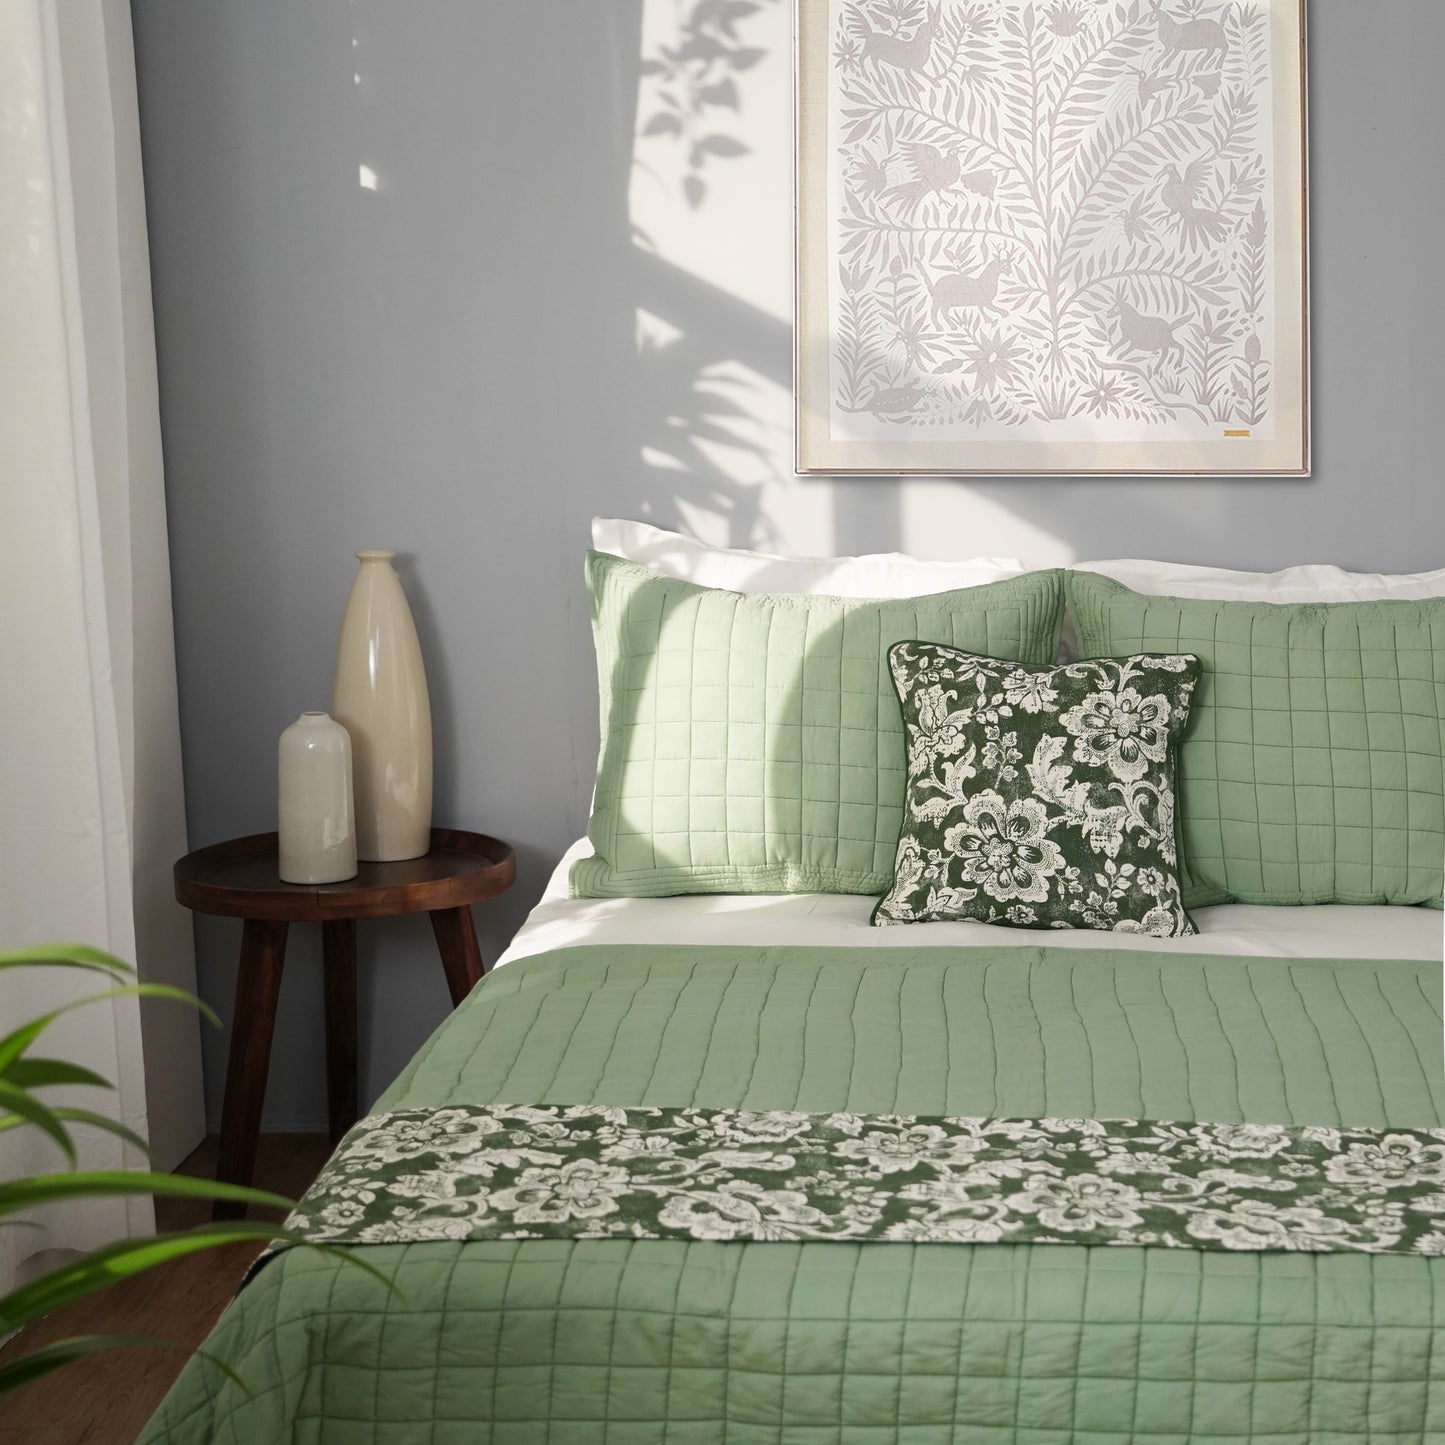 SAGE GREEN cotton Quilt sets or Quilt, Sizes available